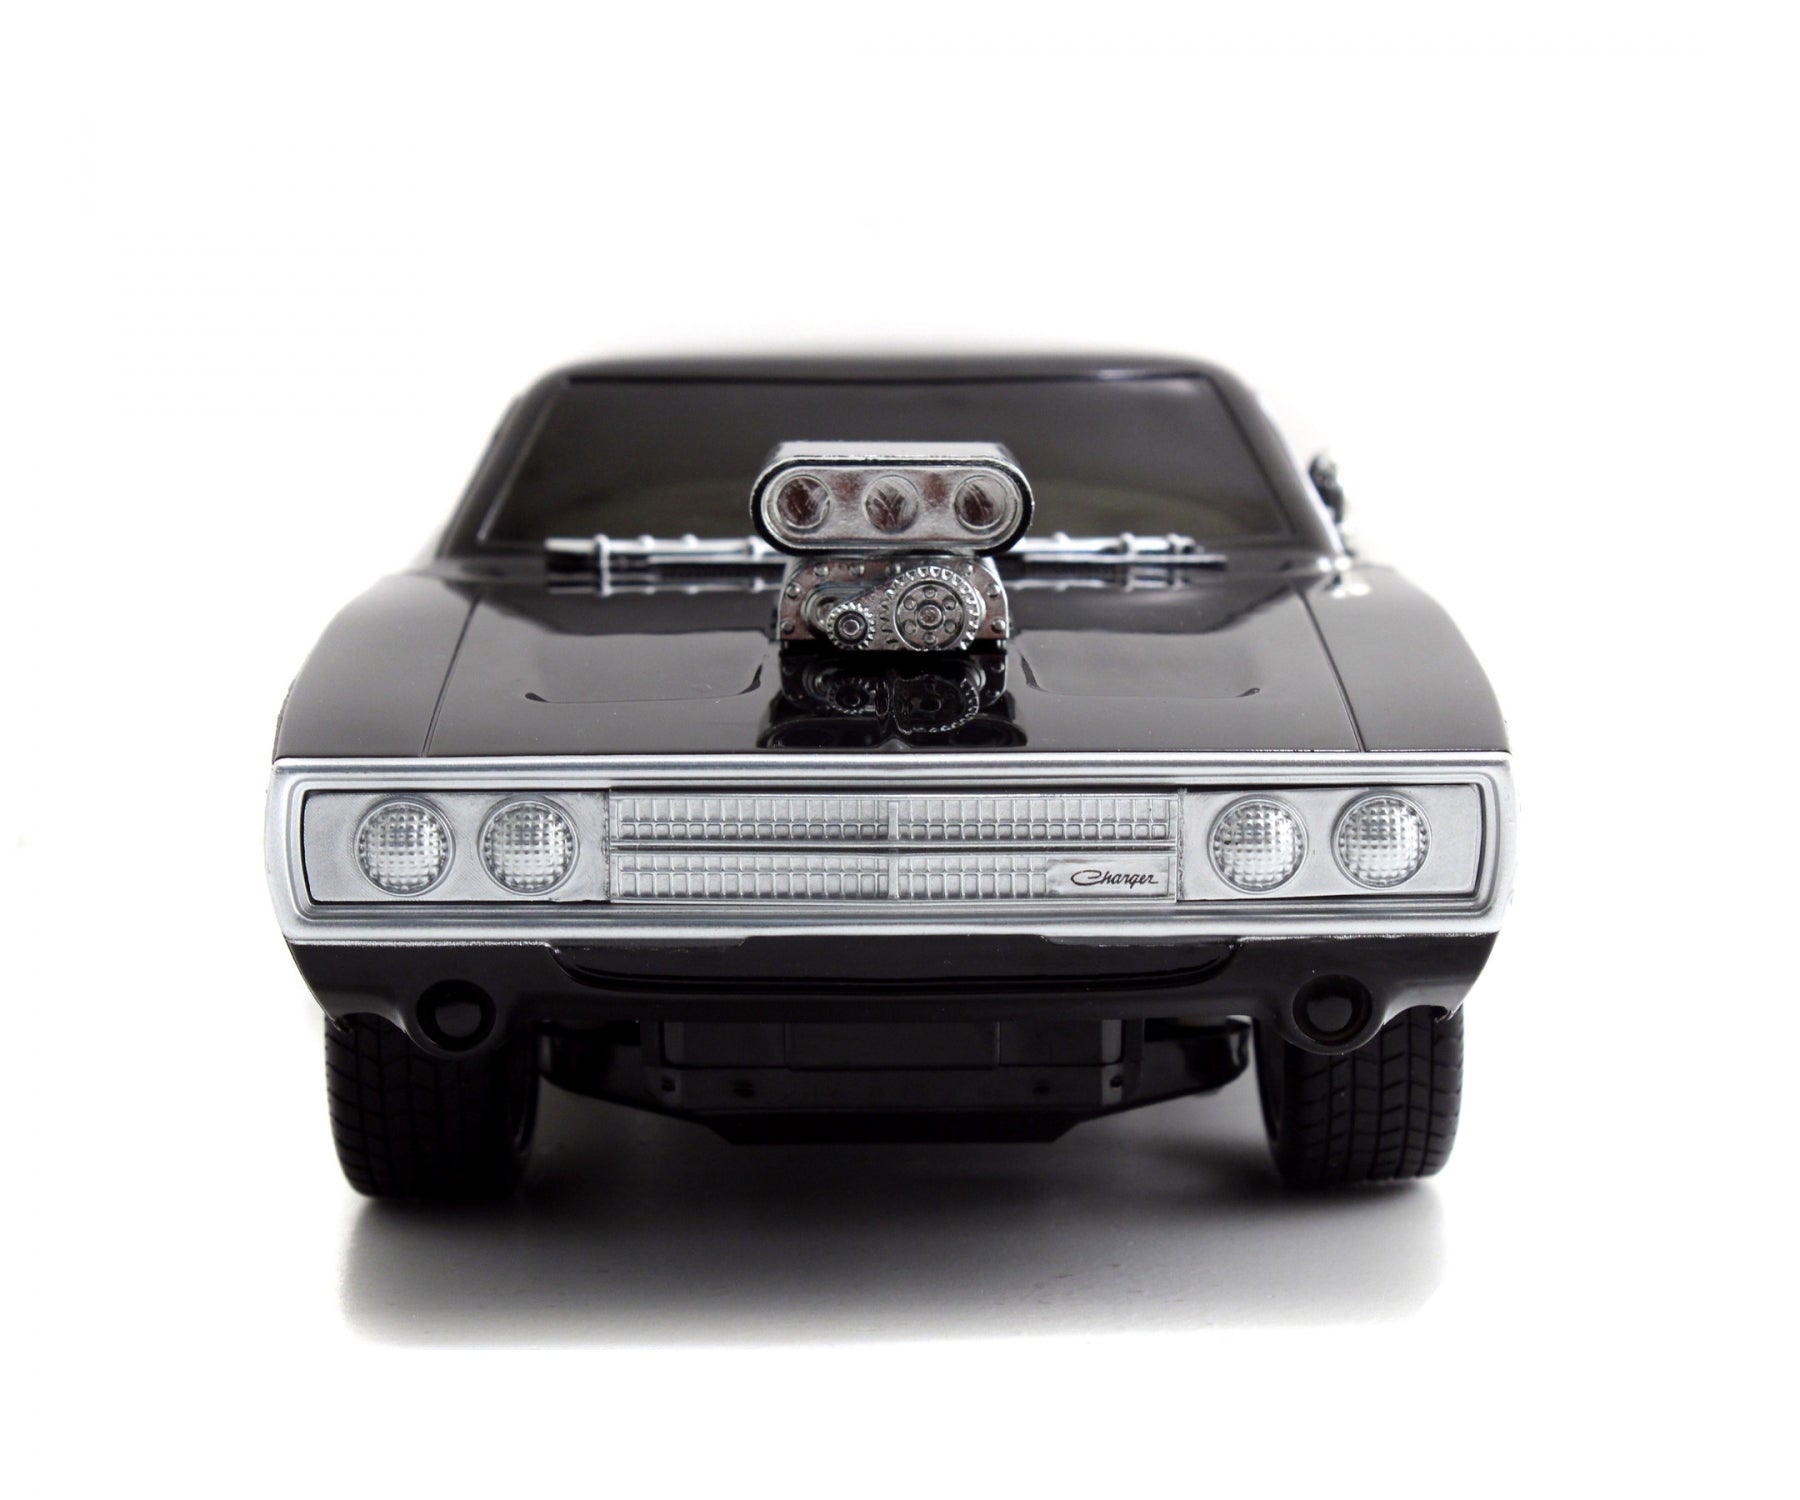 Fast&Furious Rc 1970 Dodge Charger